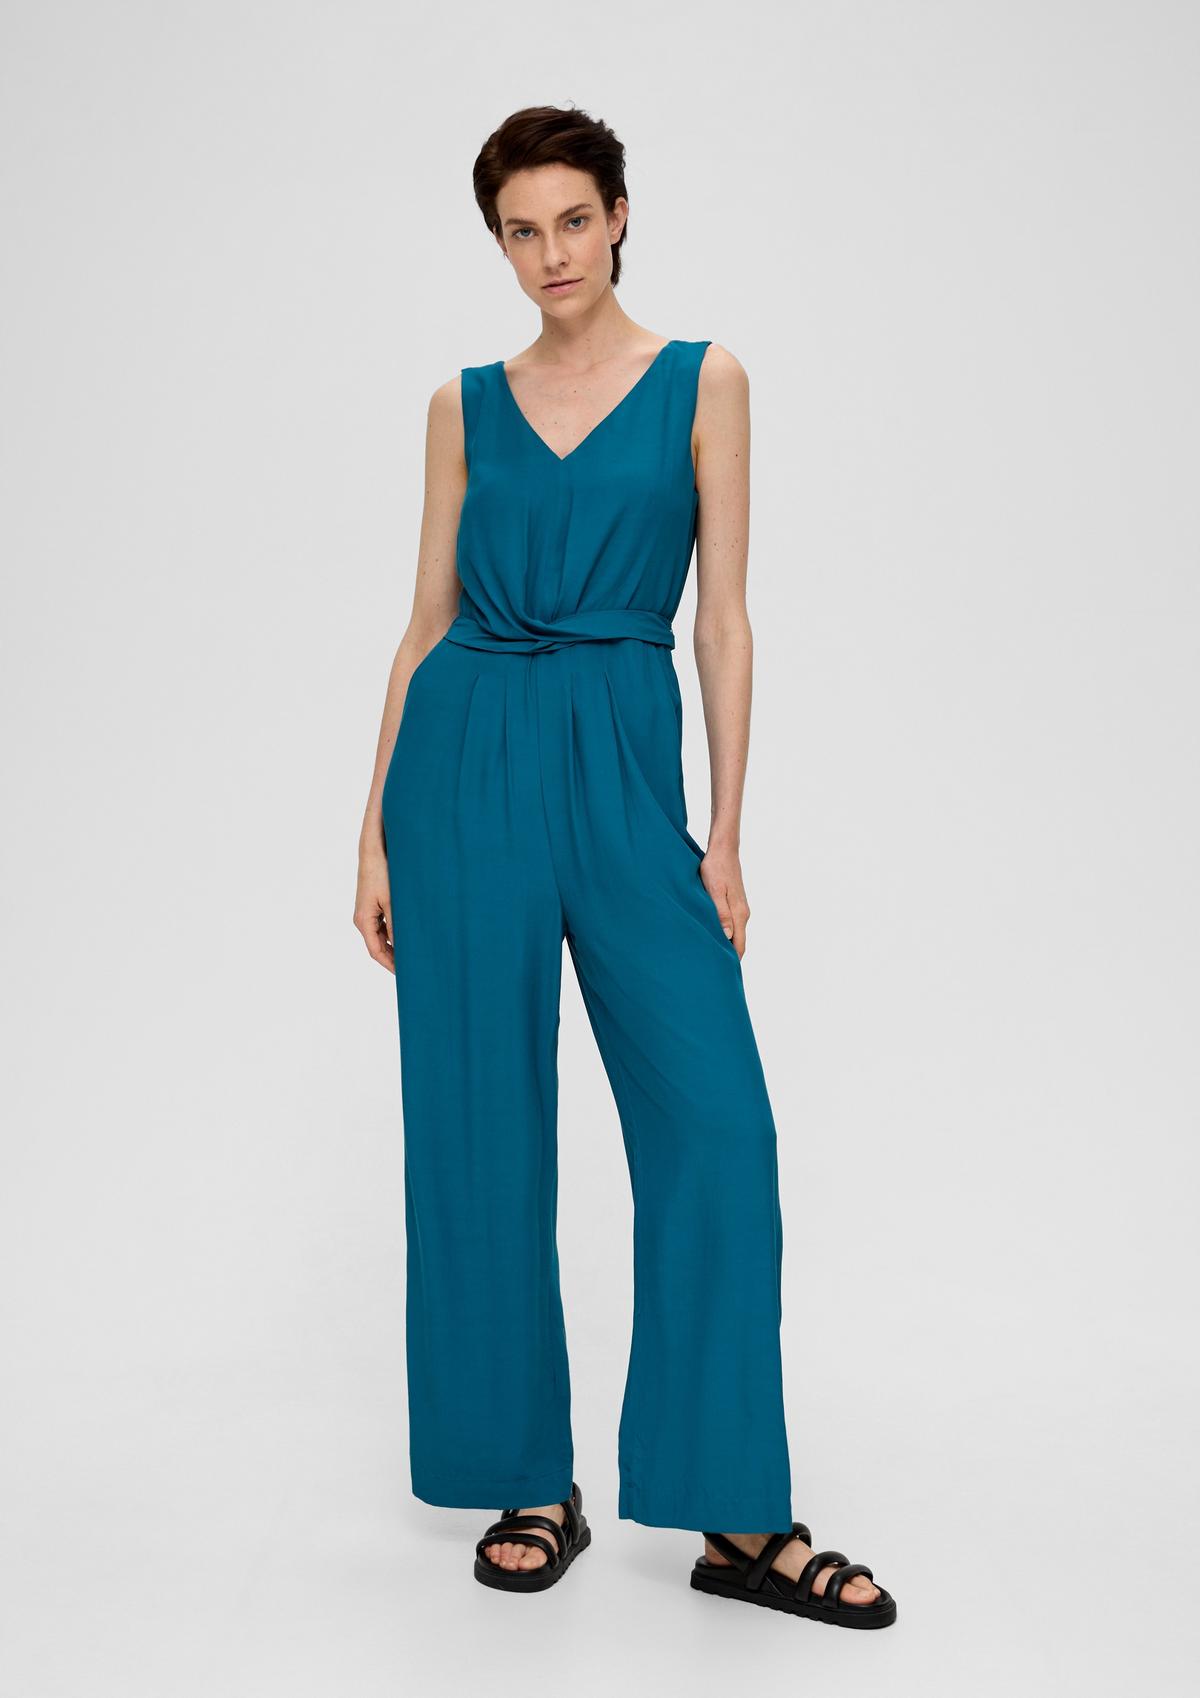 SALE: Overalls & Jumpsuits for Women | s.Oliver